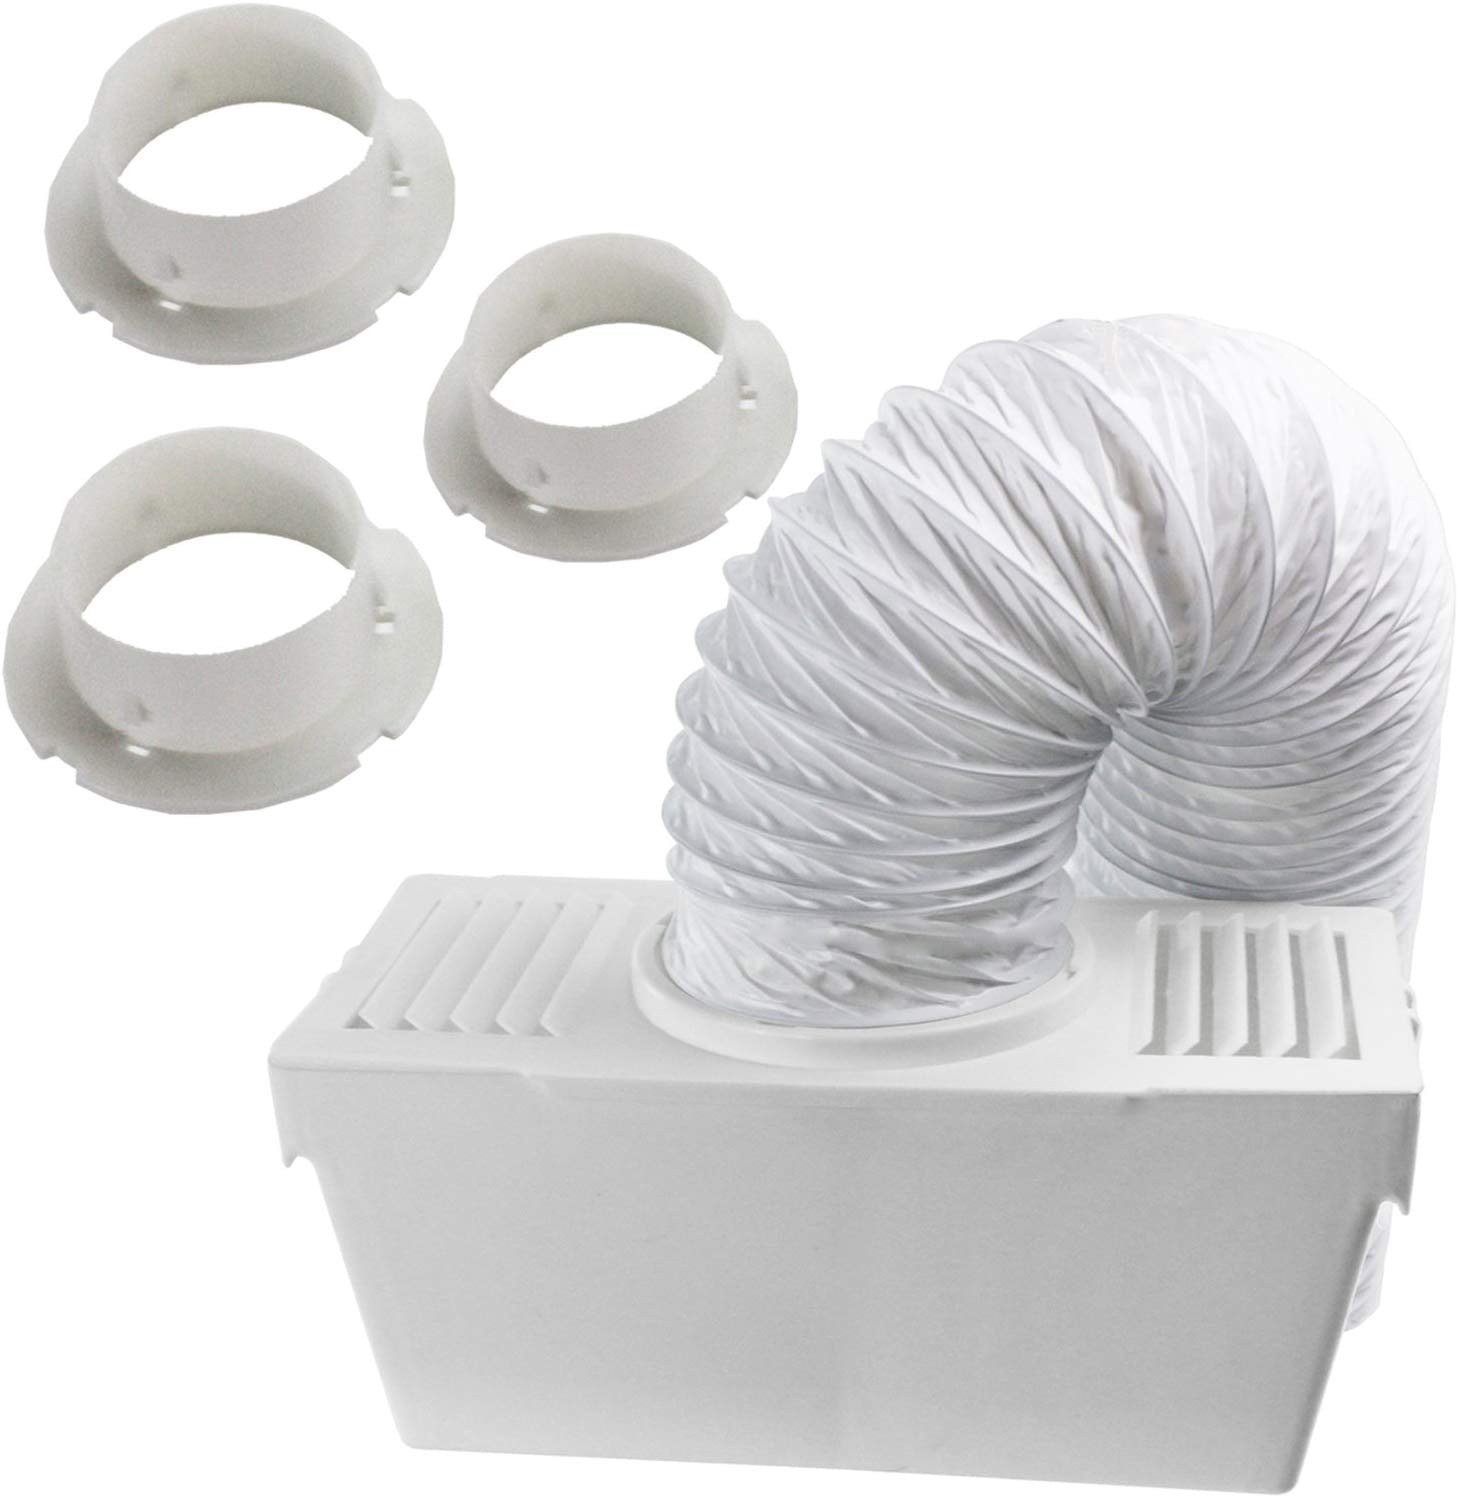 Vent Hose Condenser Kit with 3 x Adapters for Creda Tumble Dryer (1.2m)